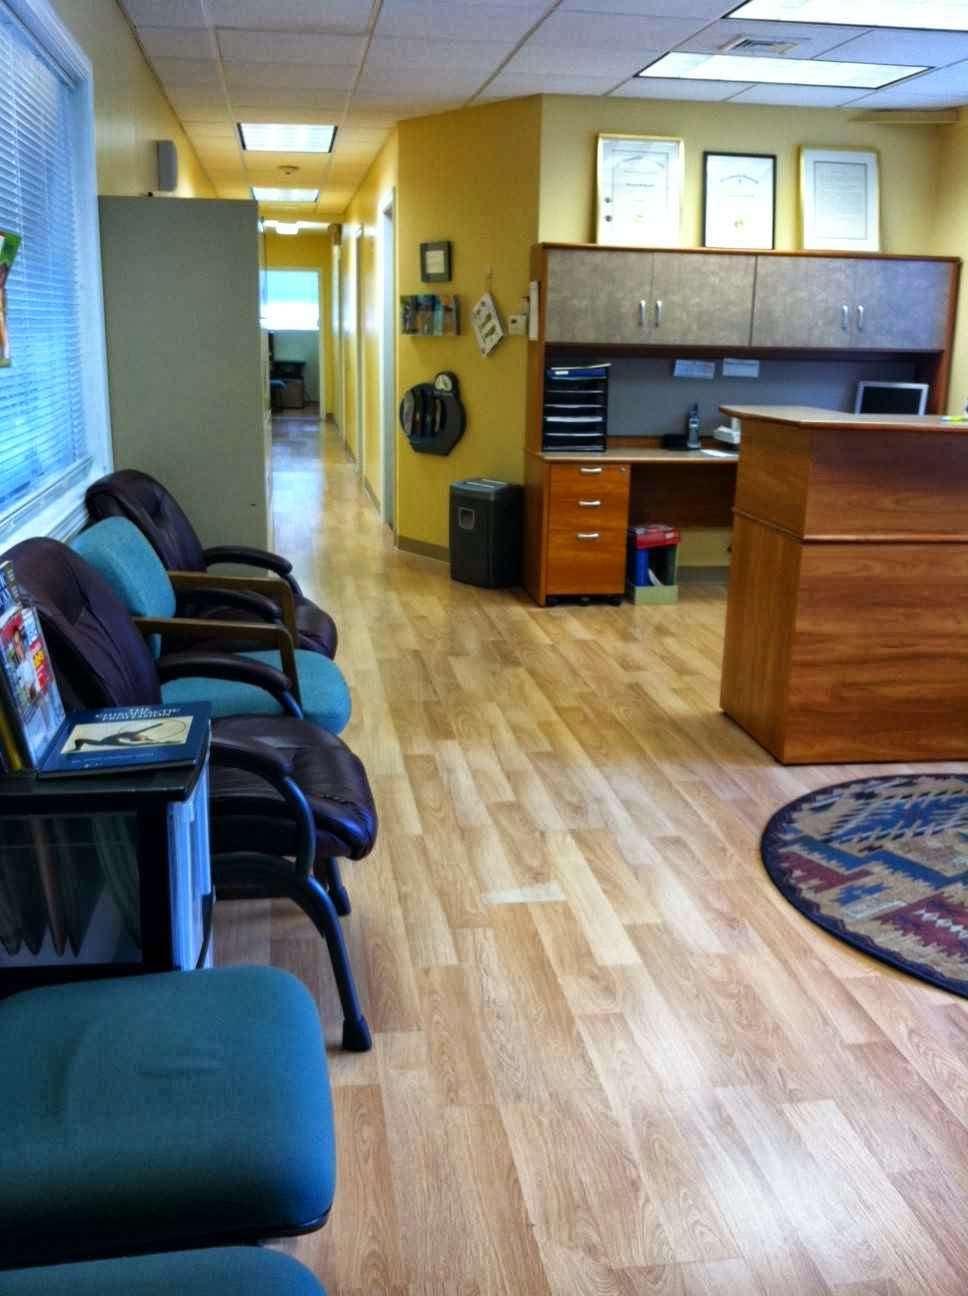 DeMarco Family Chiropractic | Athletic Club, 8 Atwater Ave, Manchester-by-the-Sea, MA 01944, USA | Phone: (978) 525-3800